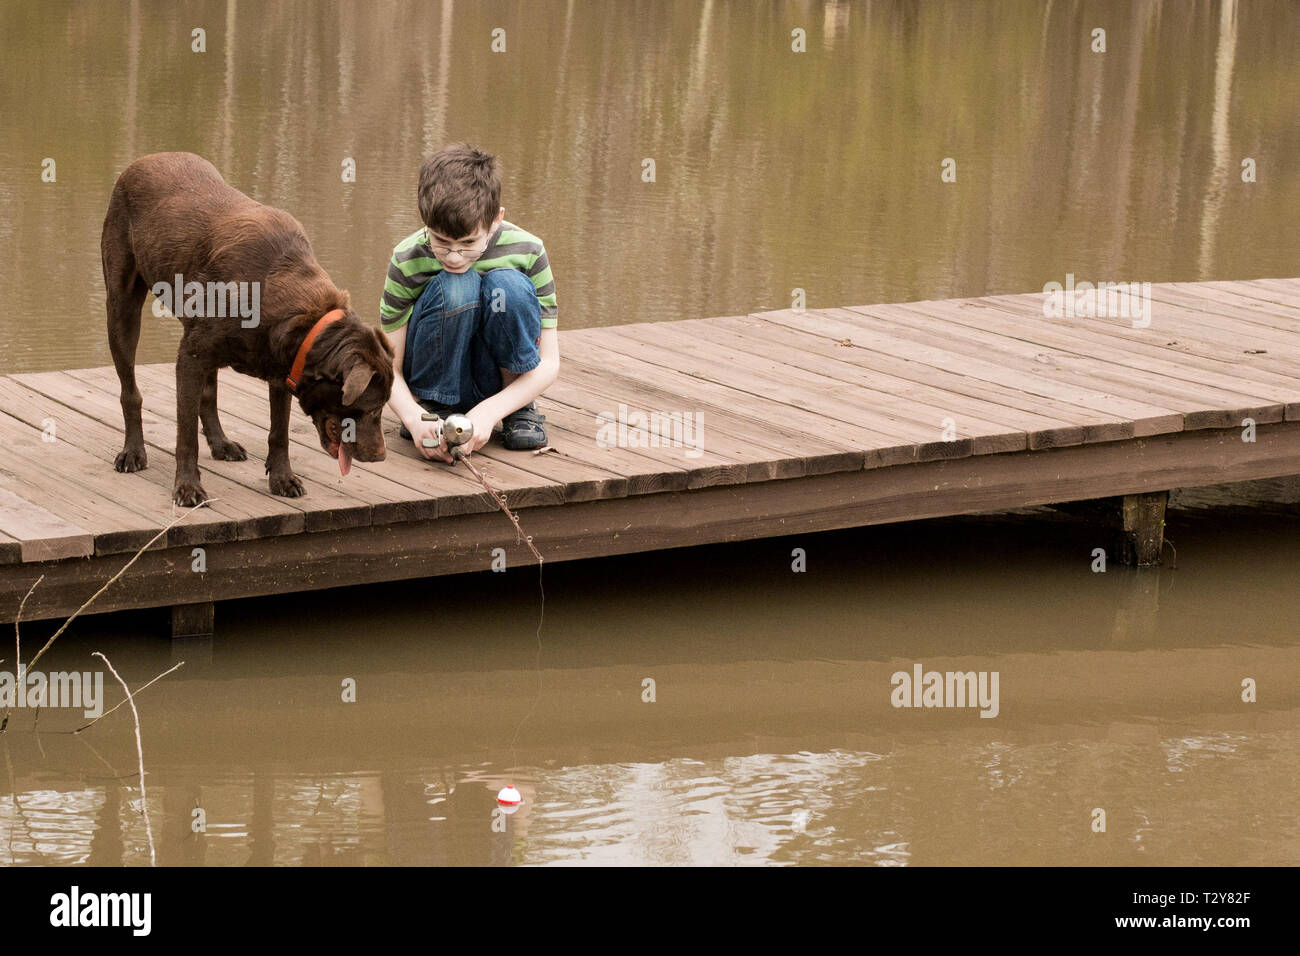 An eleven-year-old boy fishes on a dock in Madison, Mississippi, USA, as his chocolate labrador retriever dog looks on. Stock Photo